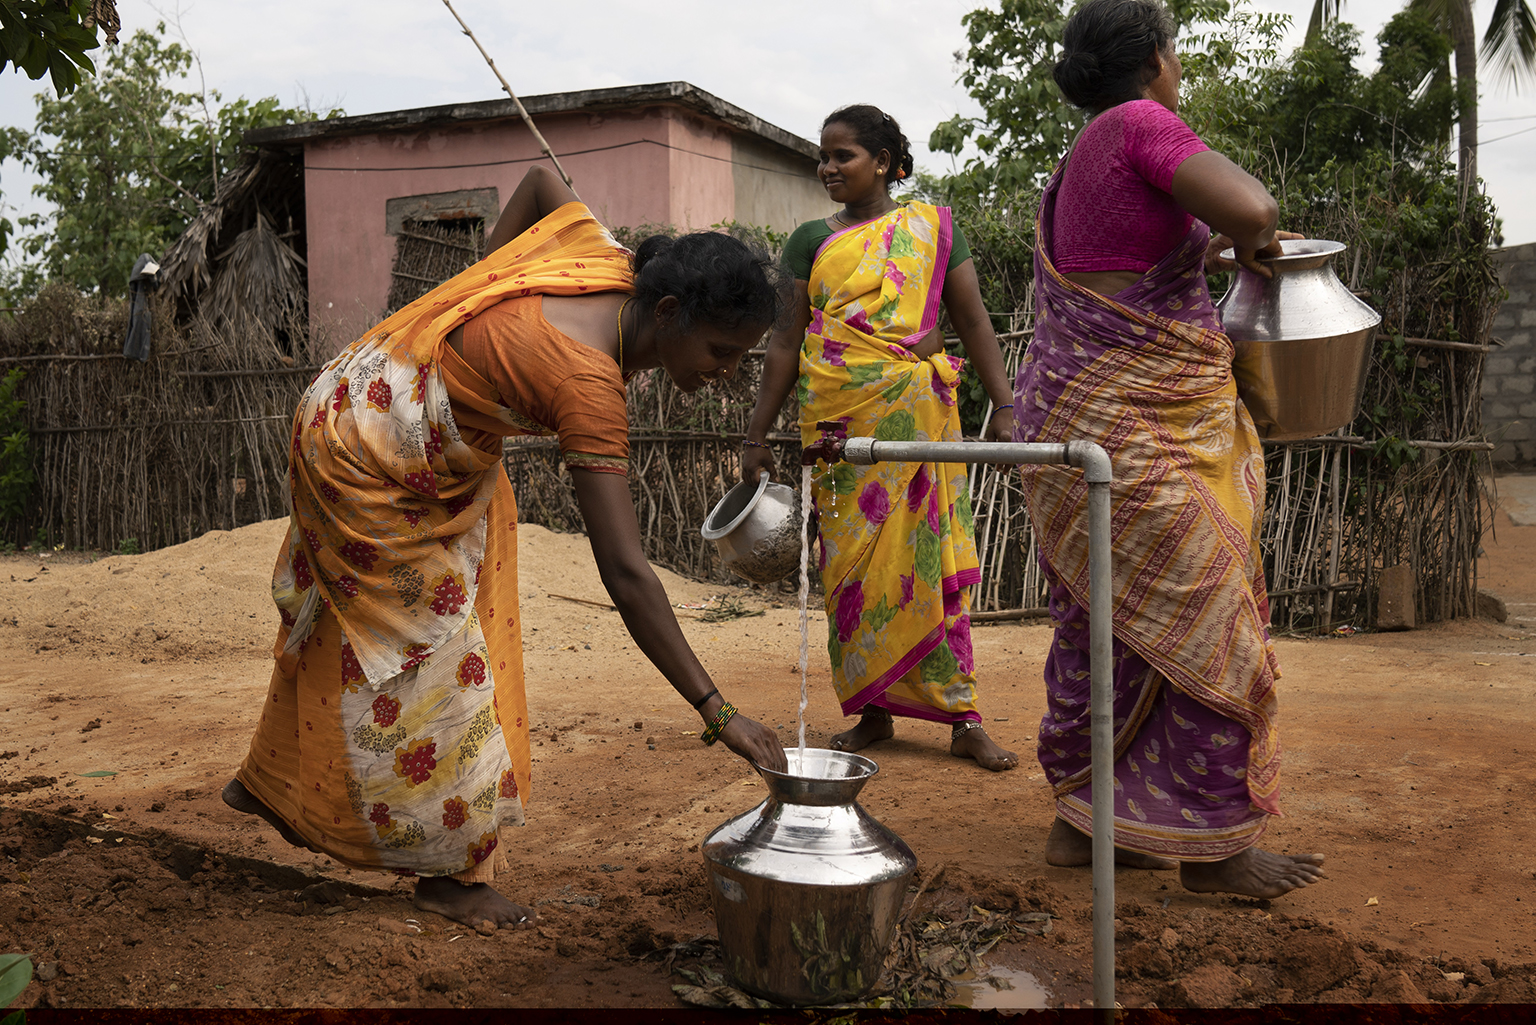 Women collect water from a new tap stand in Ananthapuram Chittoor District in the state of Andhra Pradesh